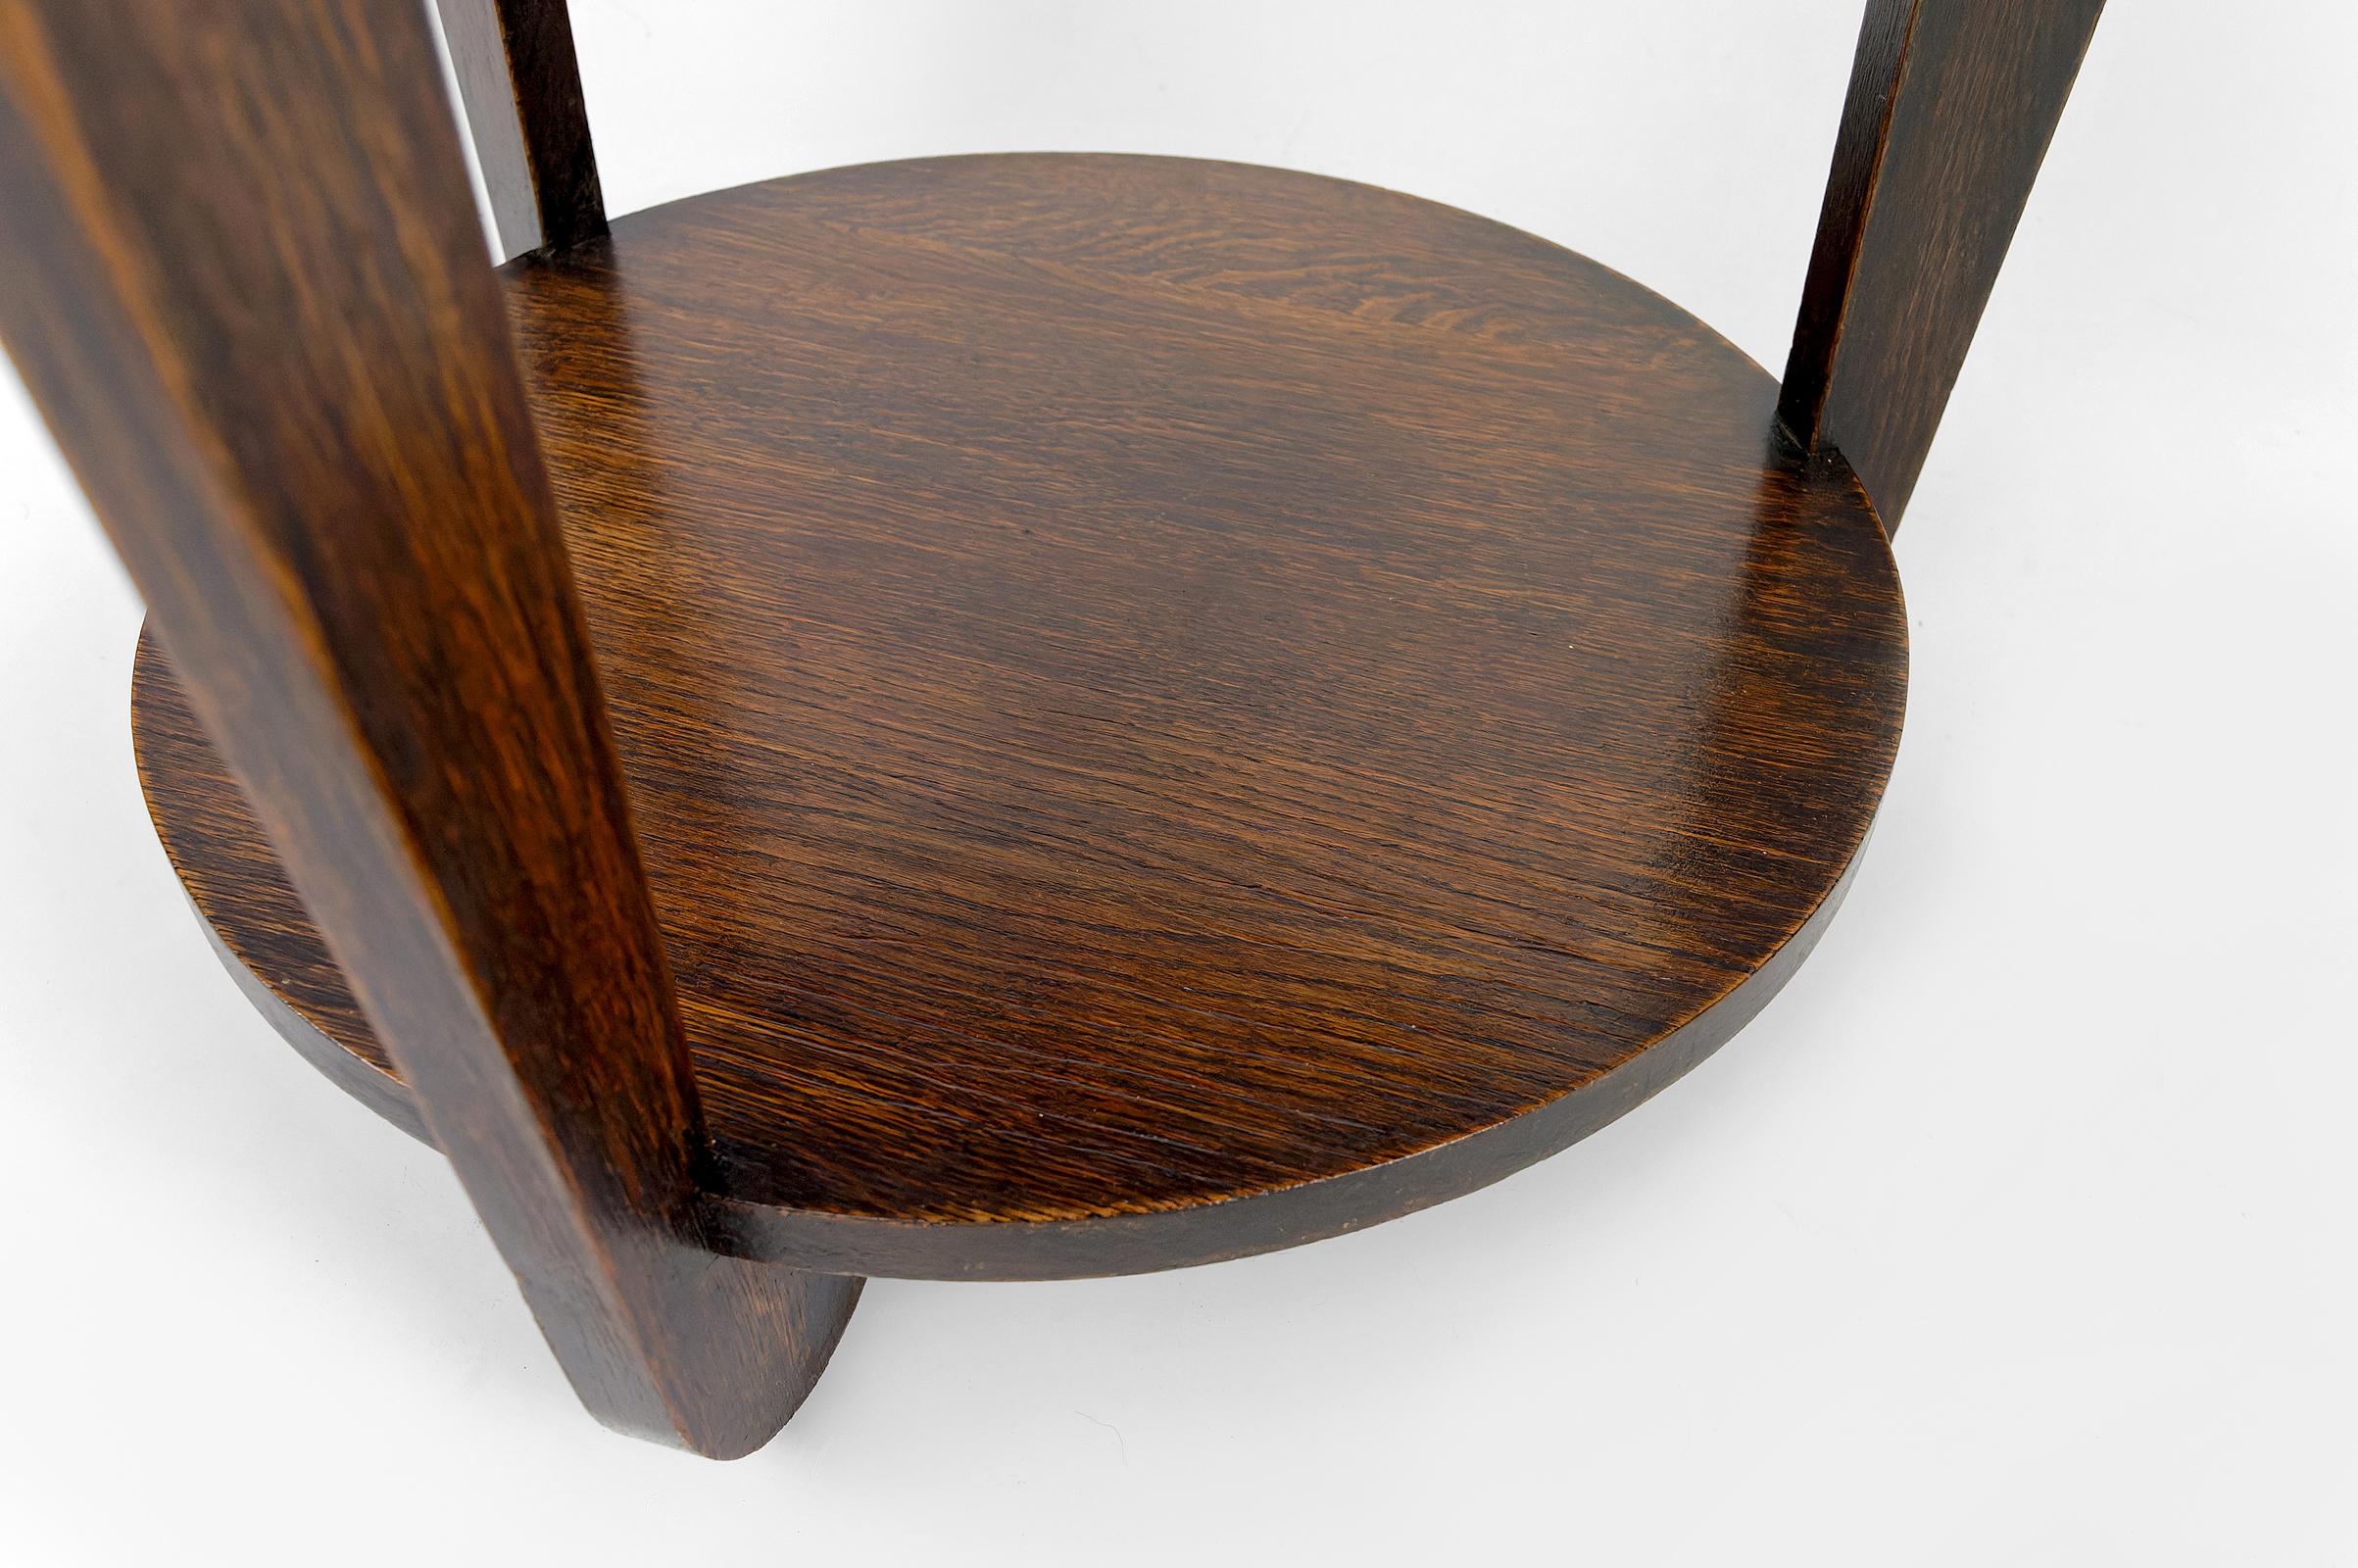 Modernist Art Deco round pedestal table in patinated oak, France, Circa 1930 For Sale 5